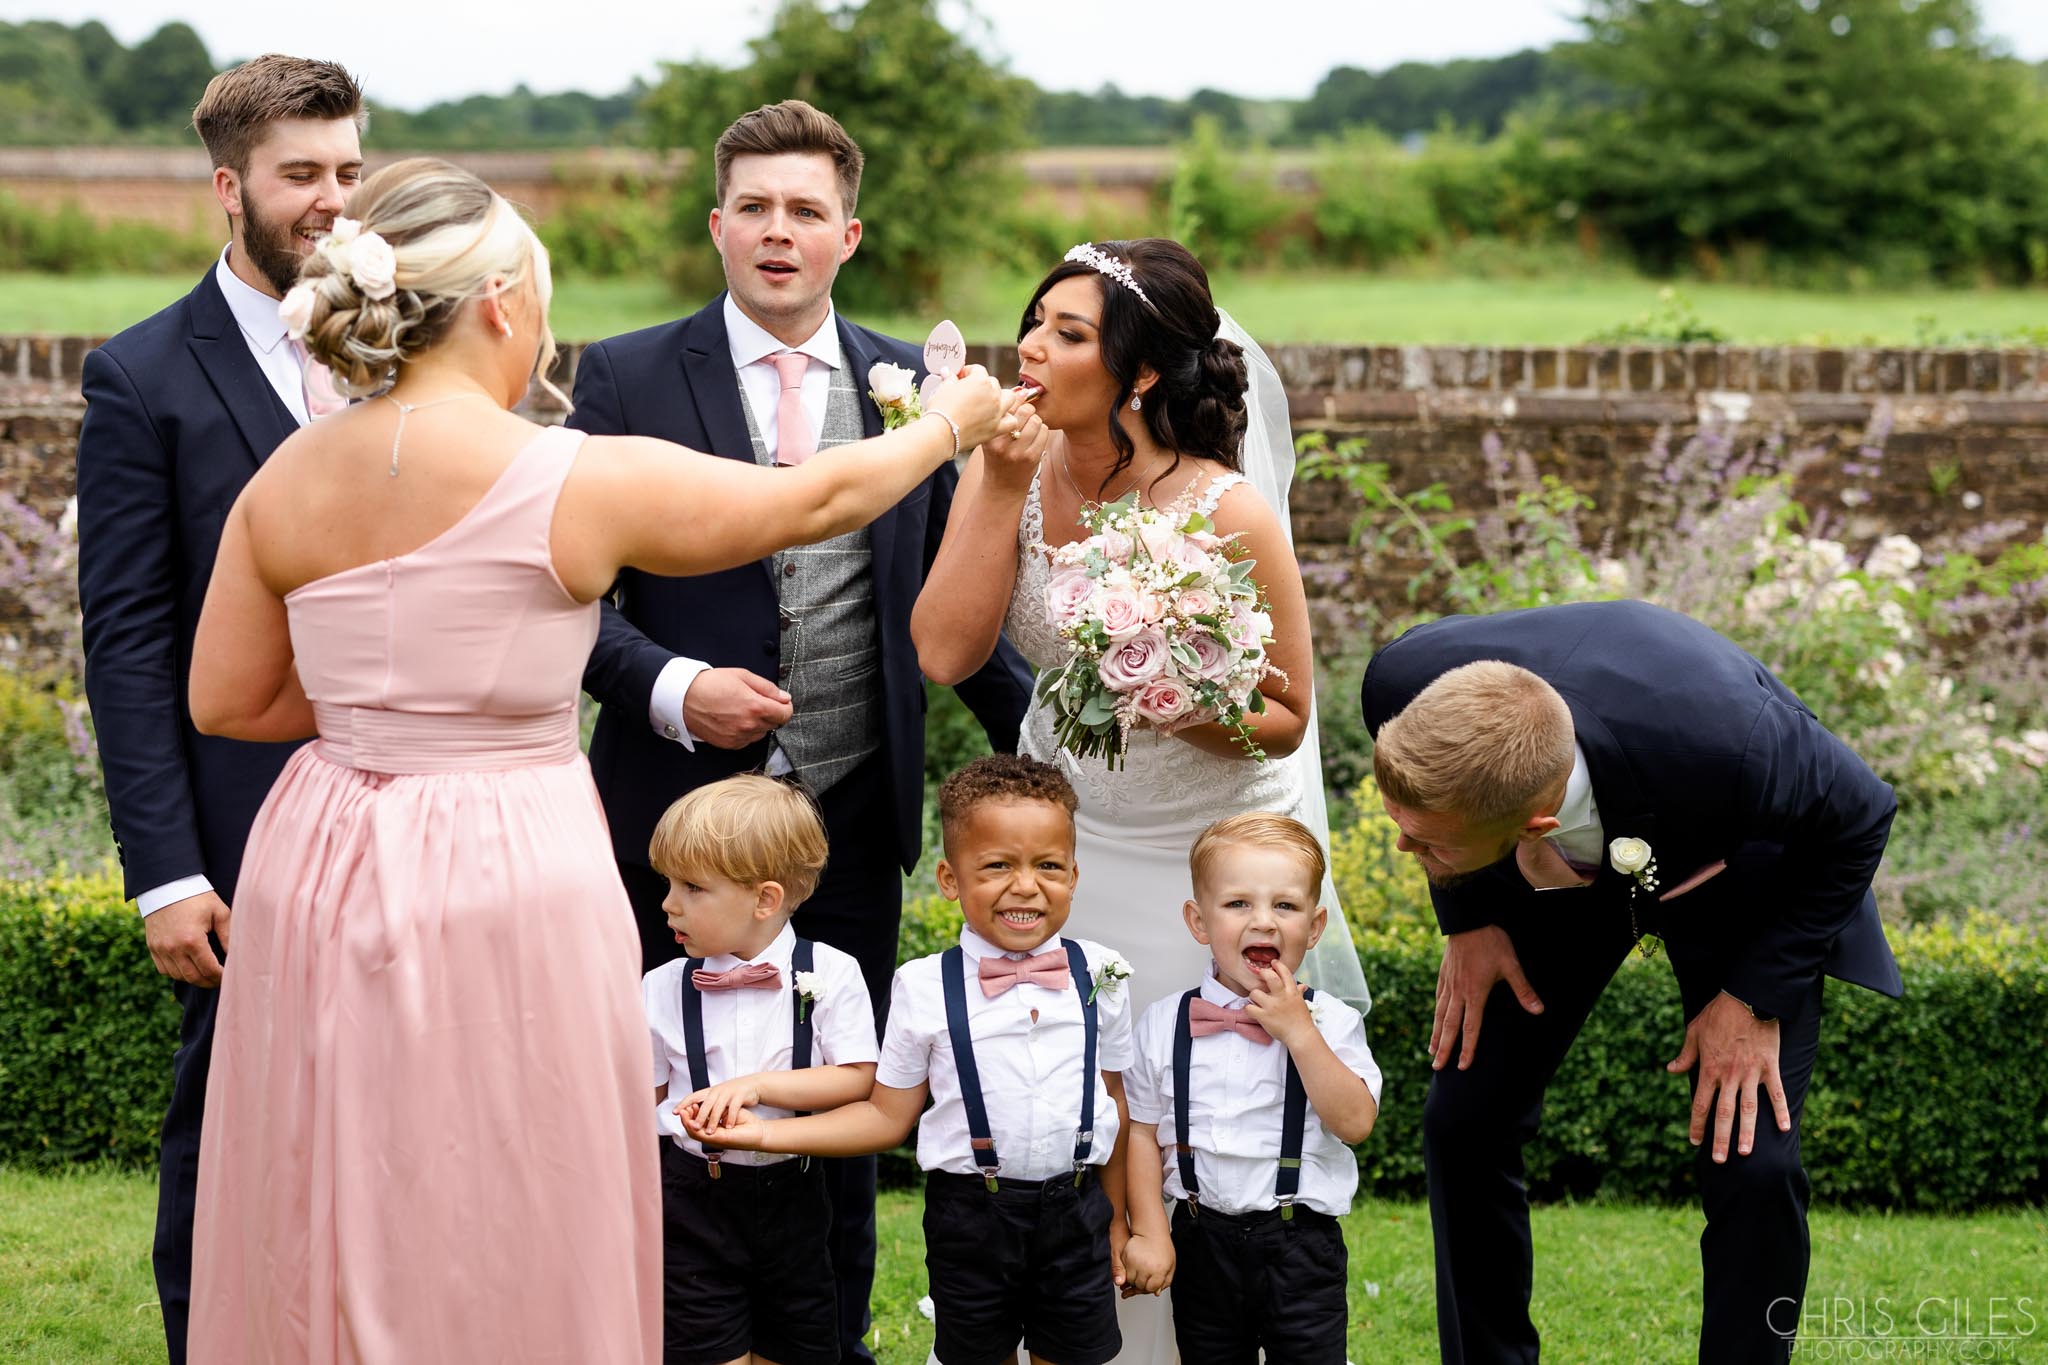 when things go wrong at a wedding